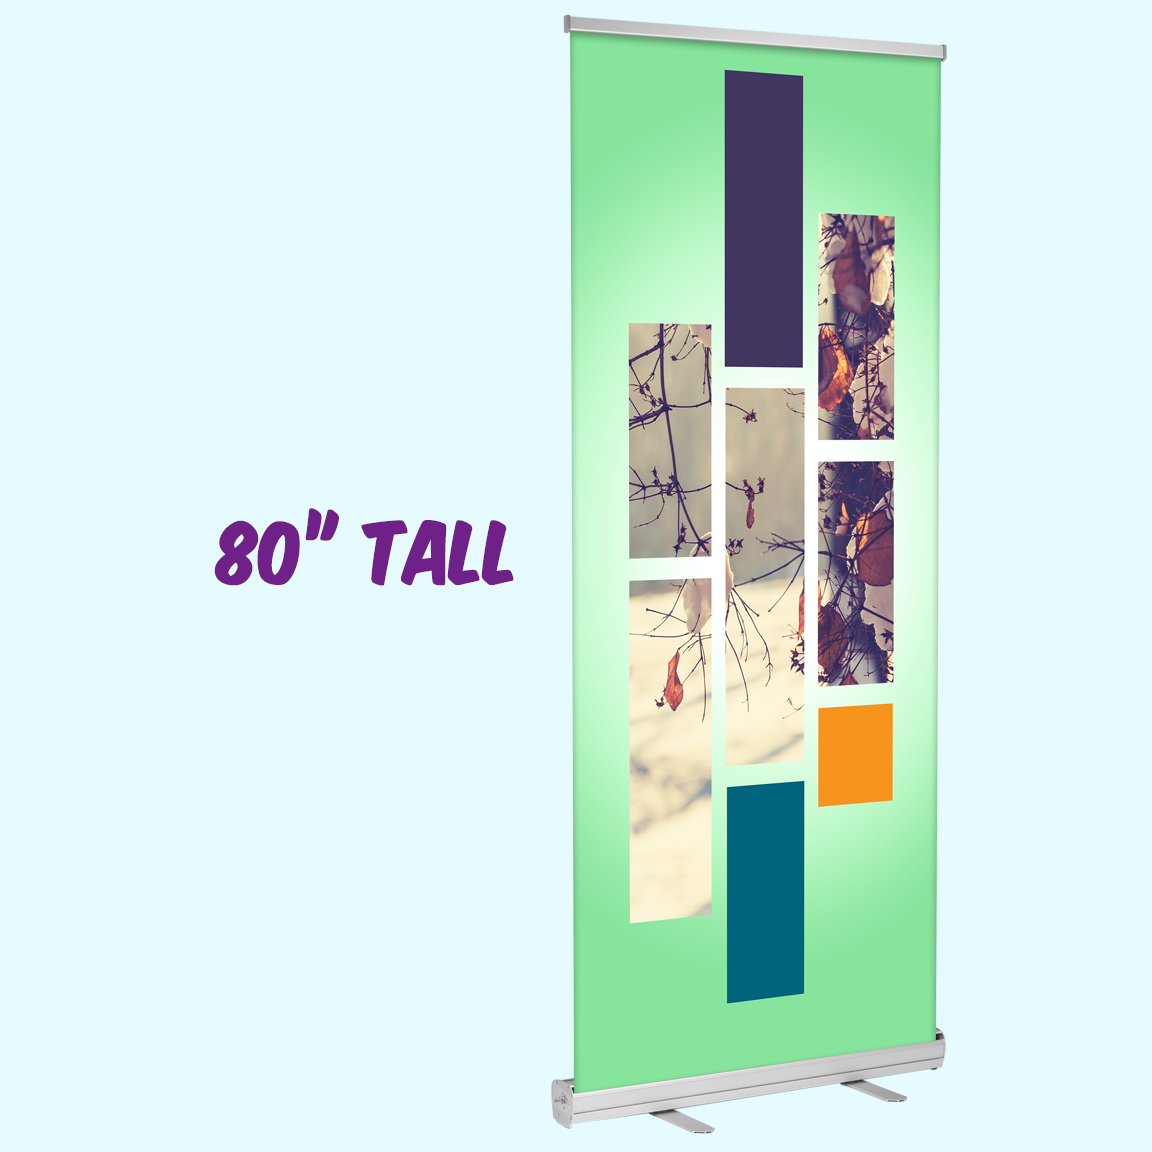 Roll-Up Banner Stand